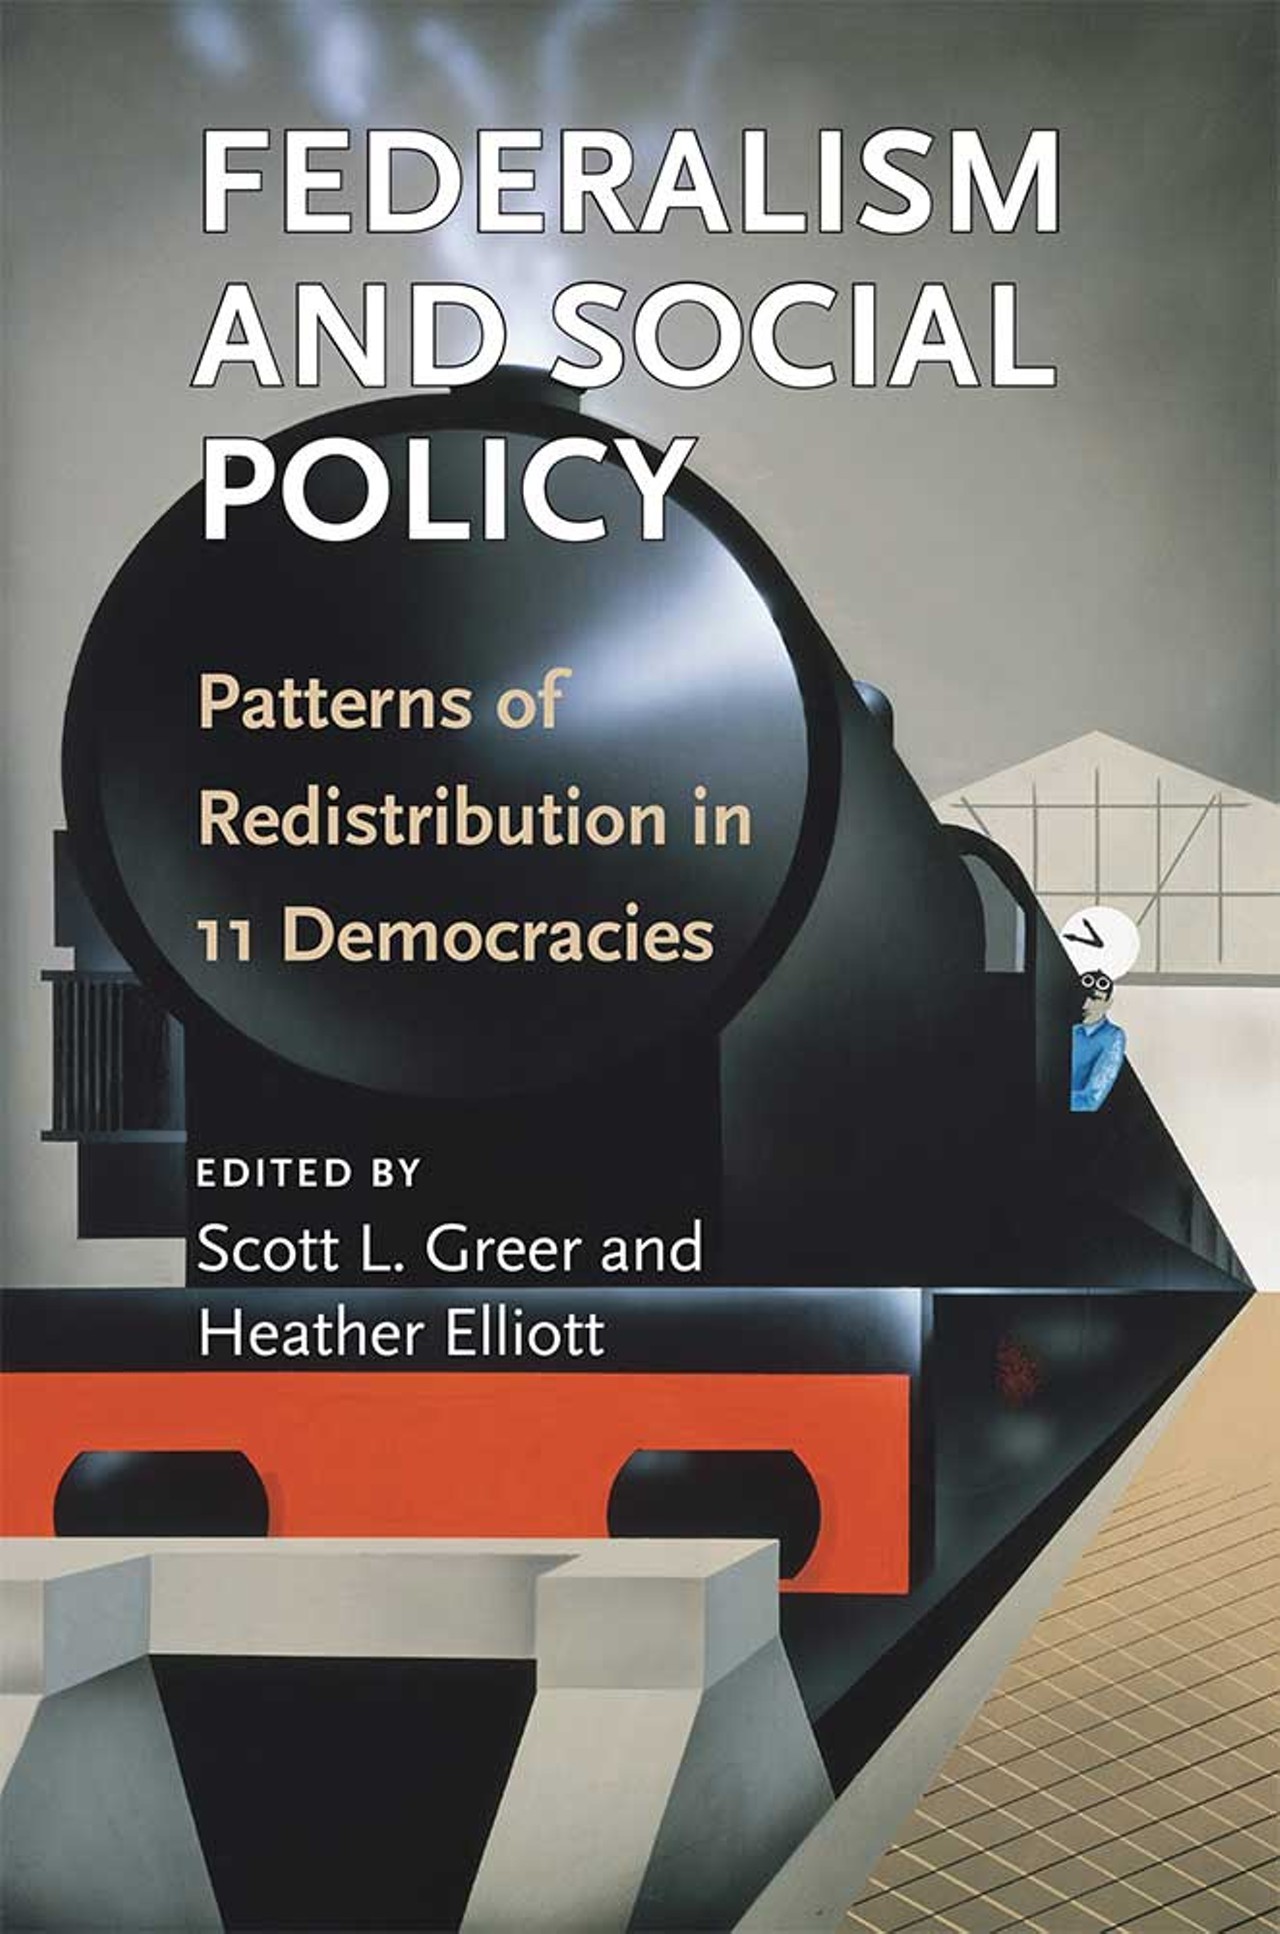 Federalism and Social Policy
From the University of Michigan Press comes an examination of strong and egalitarian welfare states&#146; compatibility with federalism. U-M political scientist Scott L. Greer and graduate student Heather Elliott, with the help of well-versed contributors, present a strong base of knowledge on the topic through examining other countries with welfare states and the effects of decentralization. Through the lens of finance and policy, the pair argues how federalism shapes regional politics and policy, with or without decentralization.